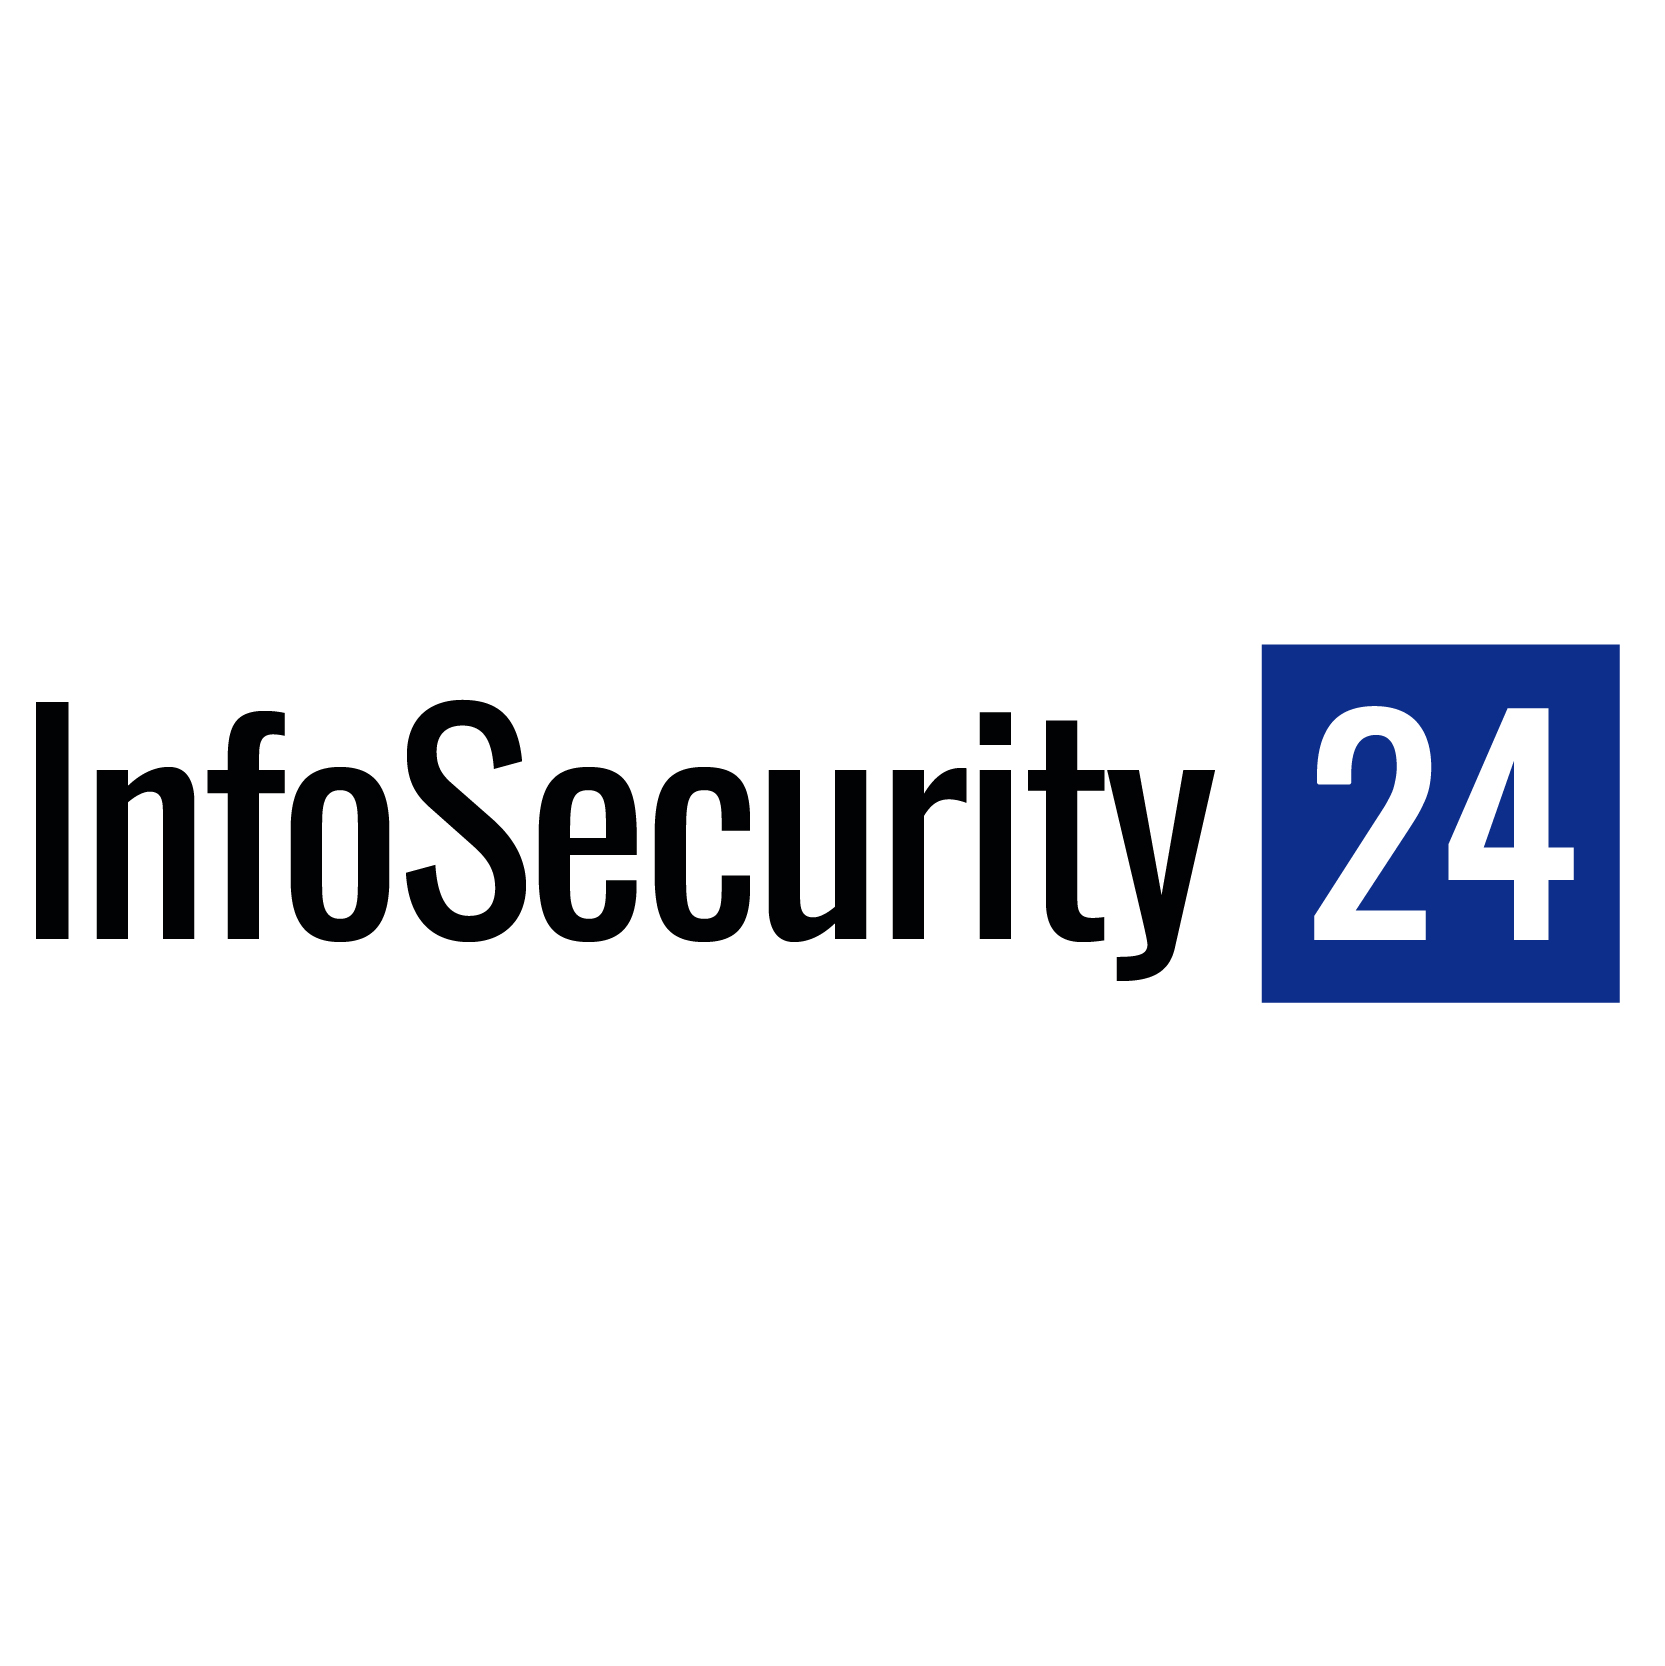 www.infosecurity24.pl